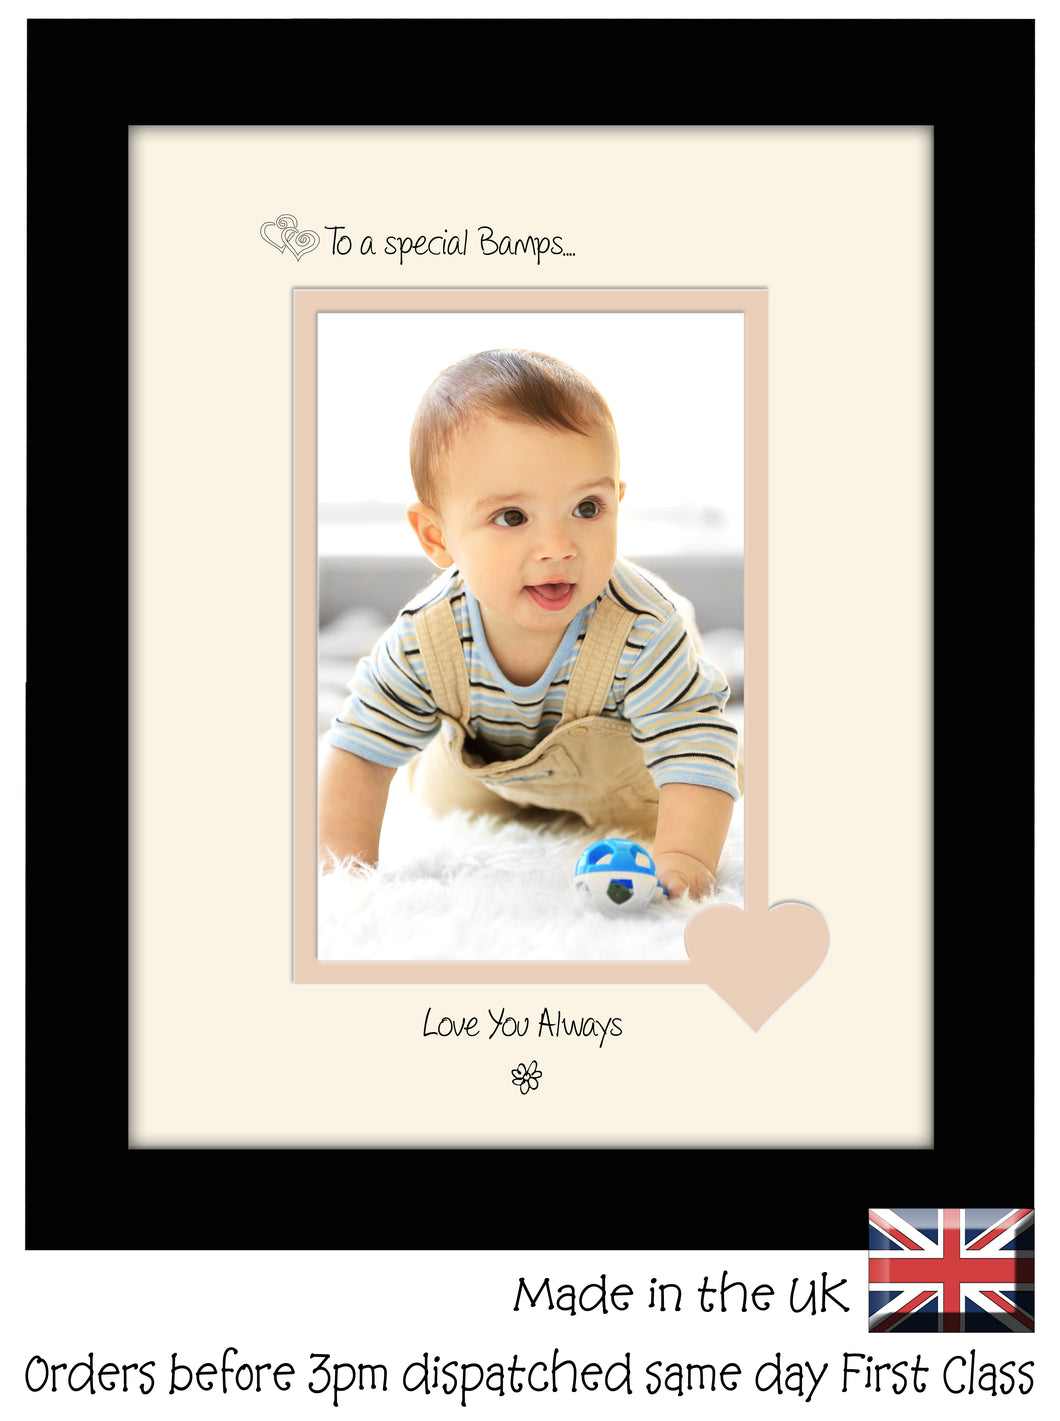 Bamps Photo Frame - To a Special Bamps ... Love you Always Portrait photo frame 6